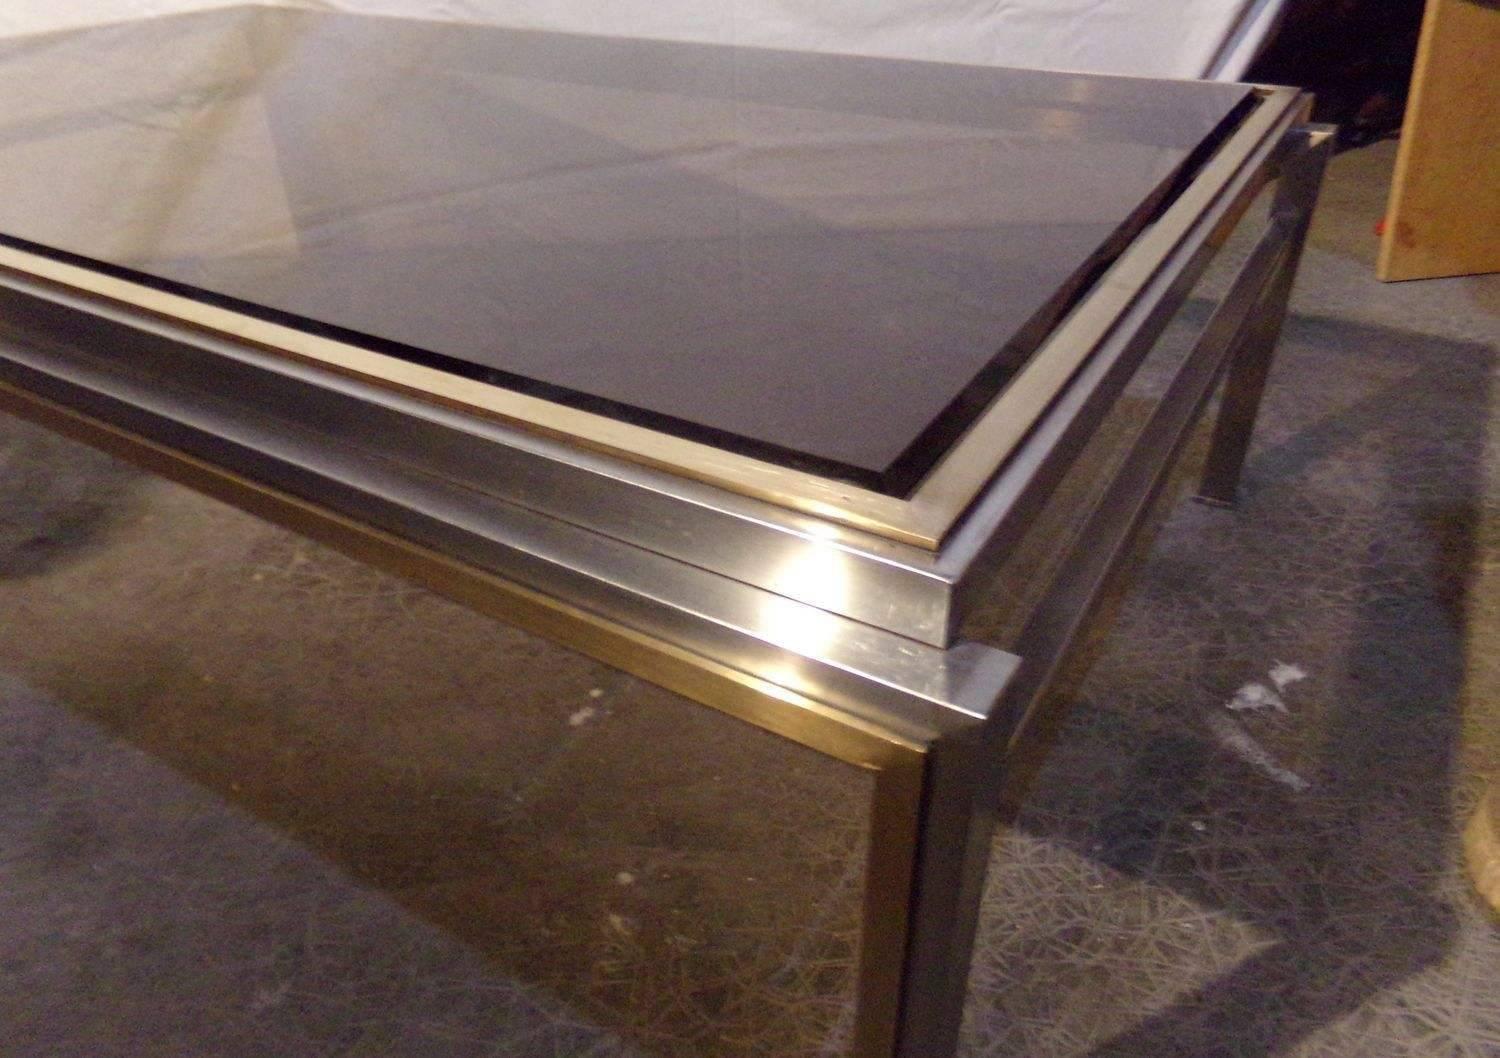 Large Willy Rizzo Coffee Table, Chrome and Gilded Metal, Smoked Glass, 1970s (Französisch) im Angebot